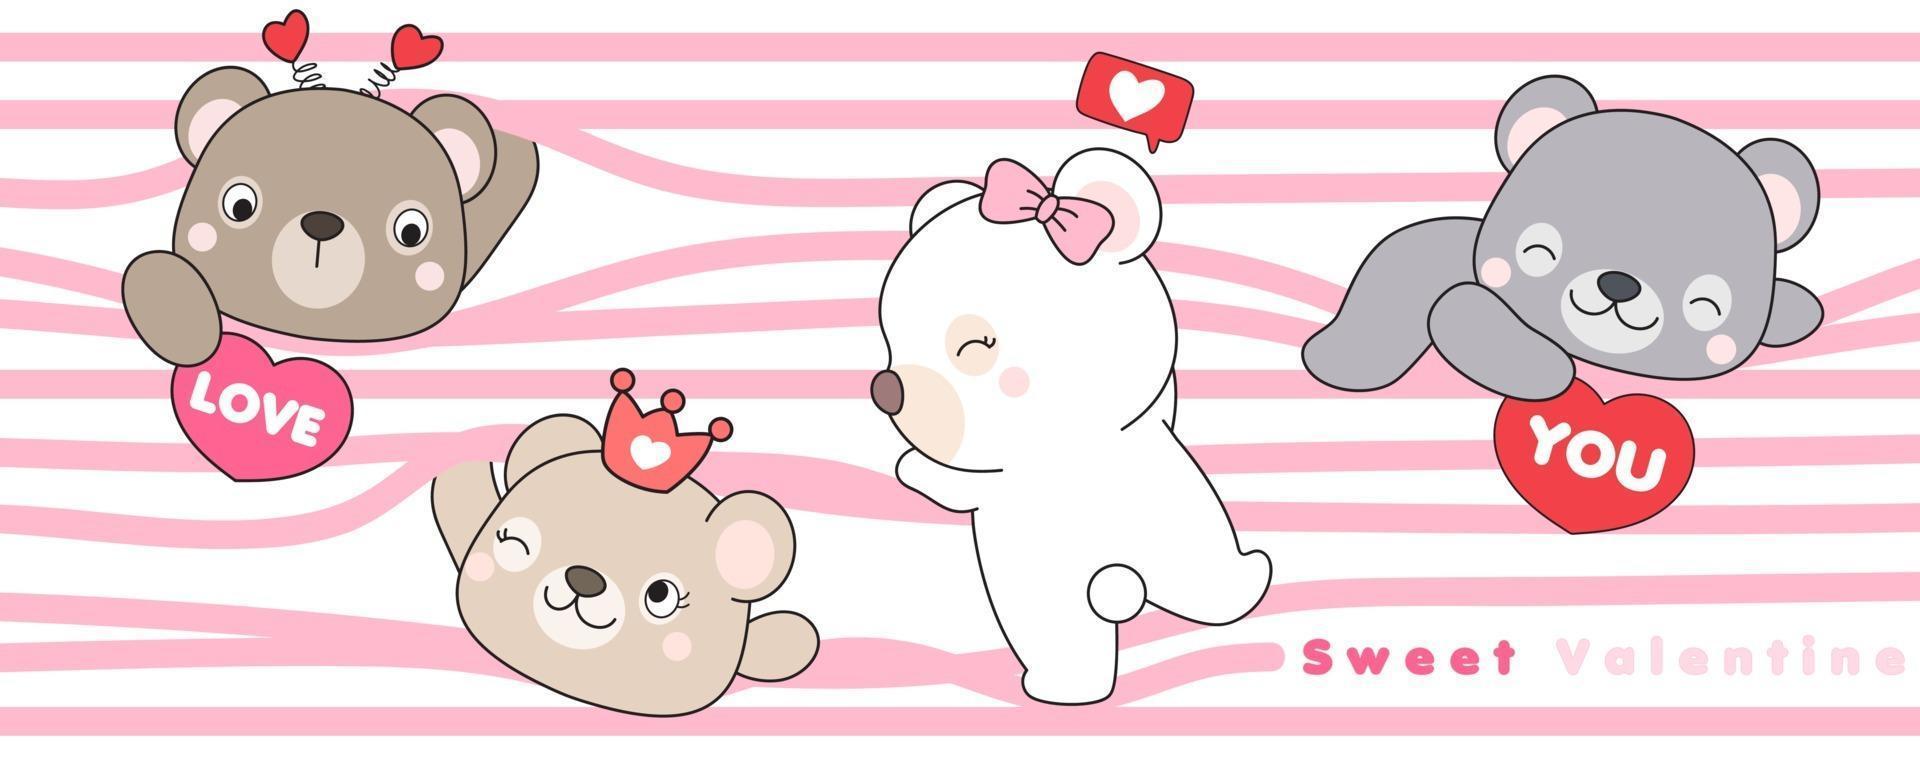 Cute doodle bear for Valentines day illustration vector